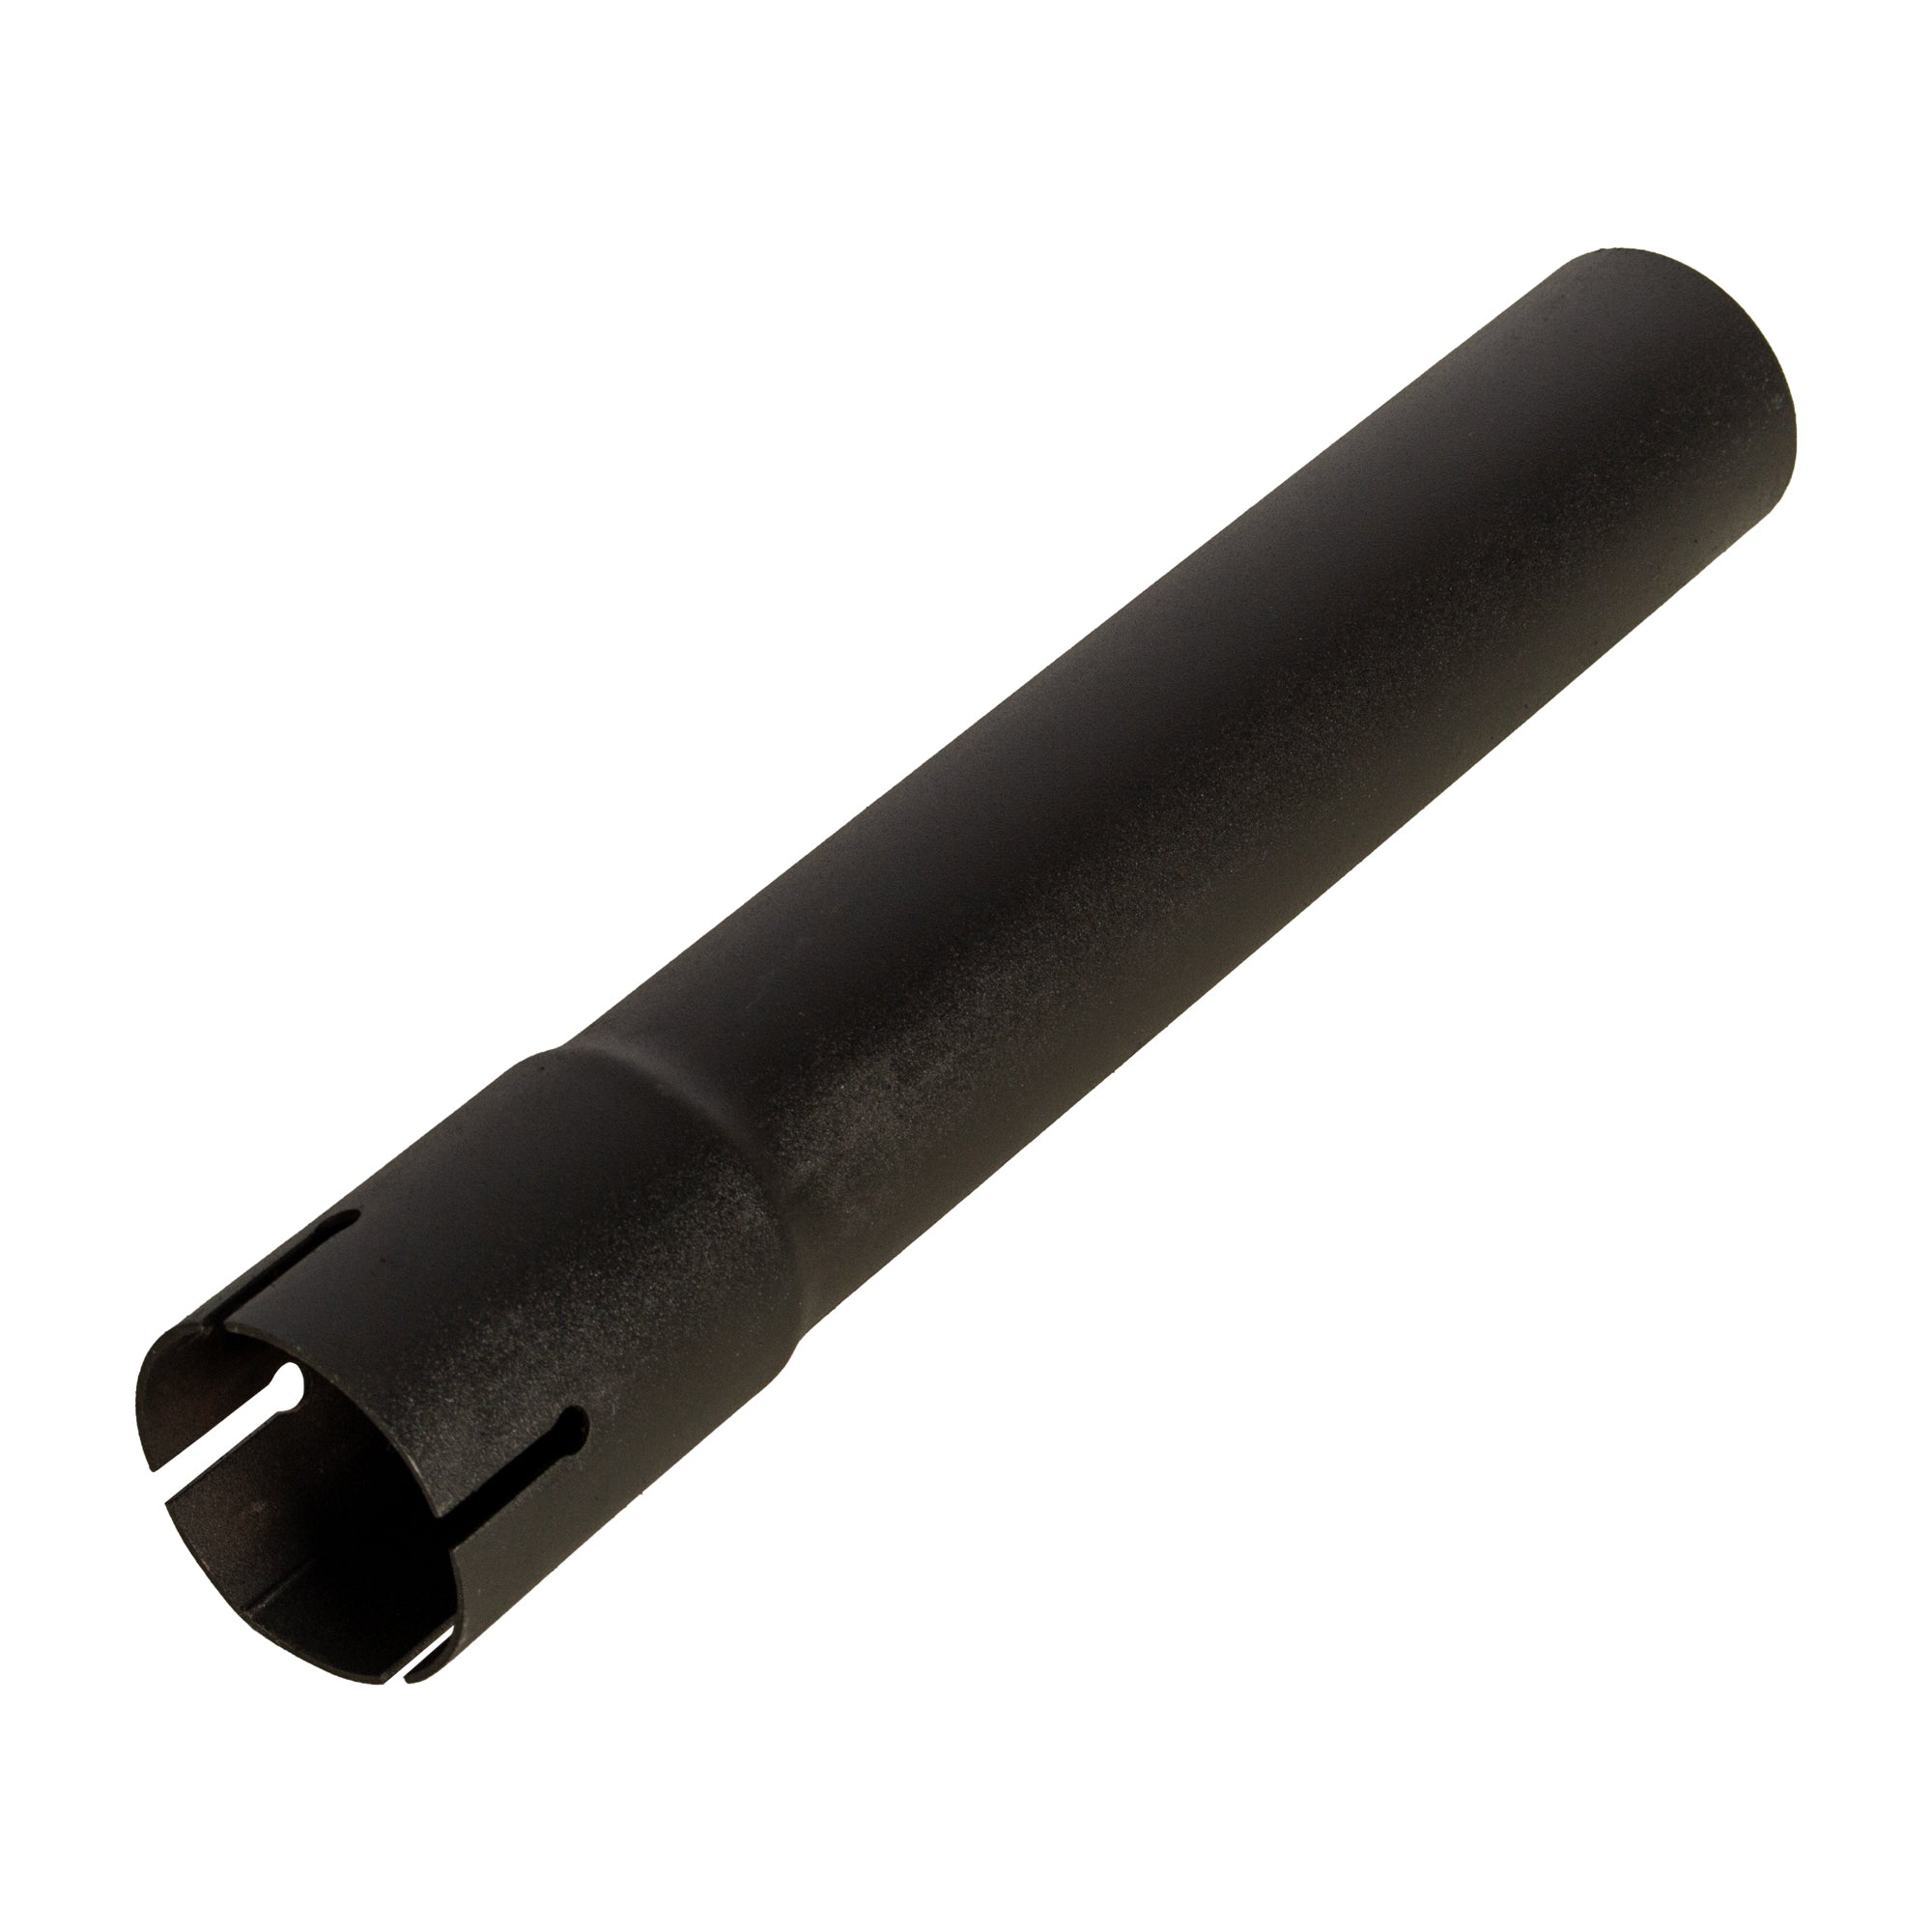 Exhaust Stack Pipe Replacement for UNIVERSAL - 1-7/8" x 12" Straight Black